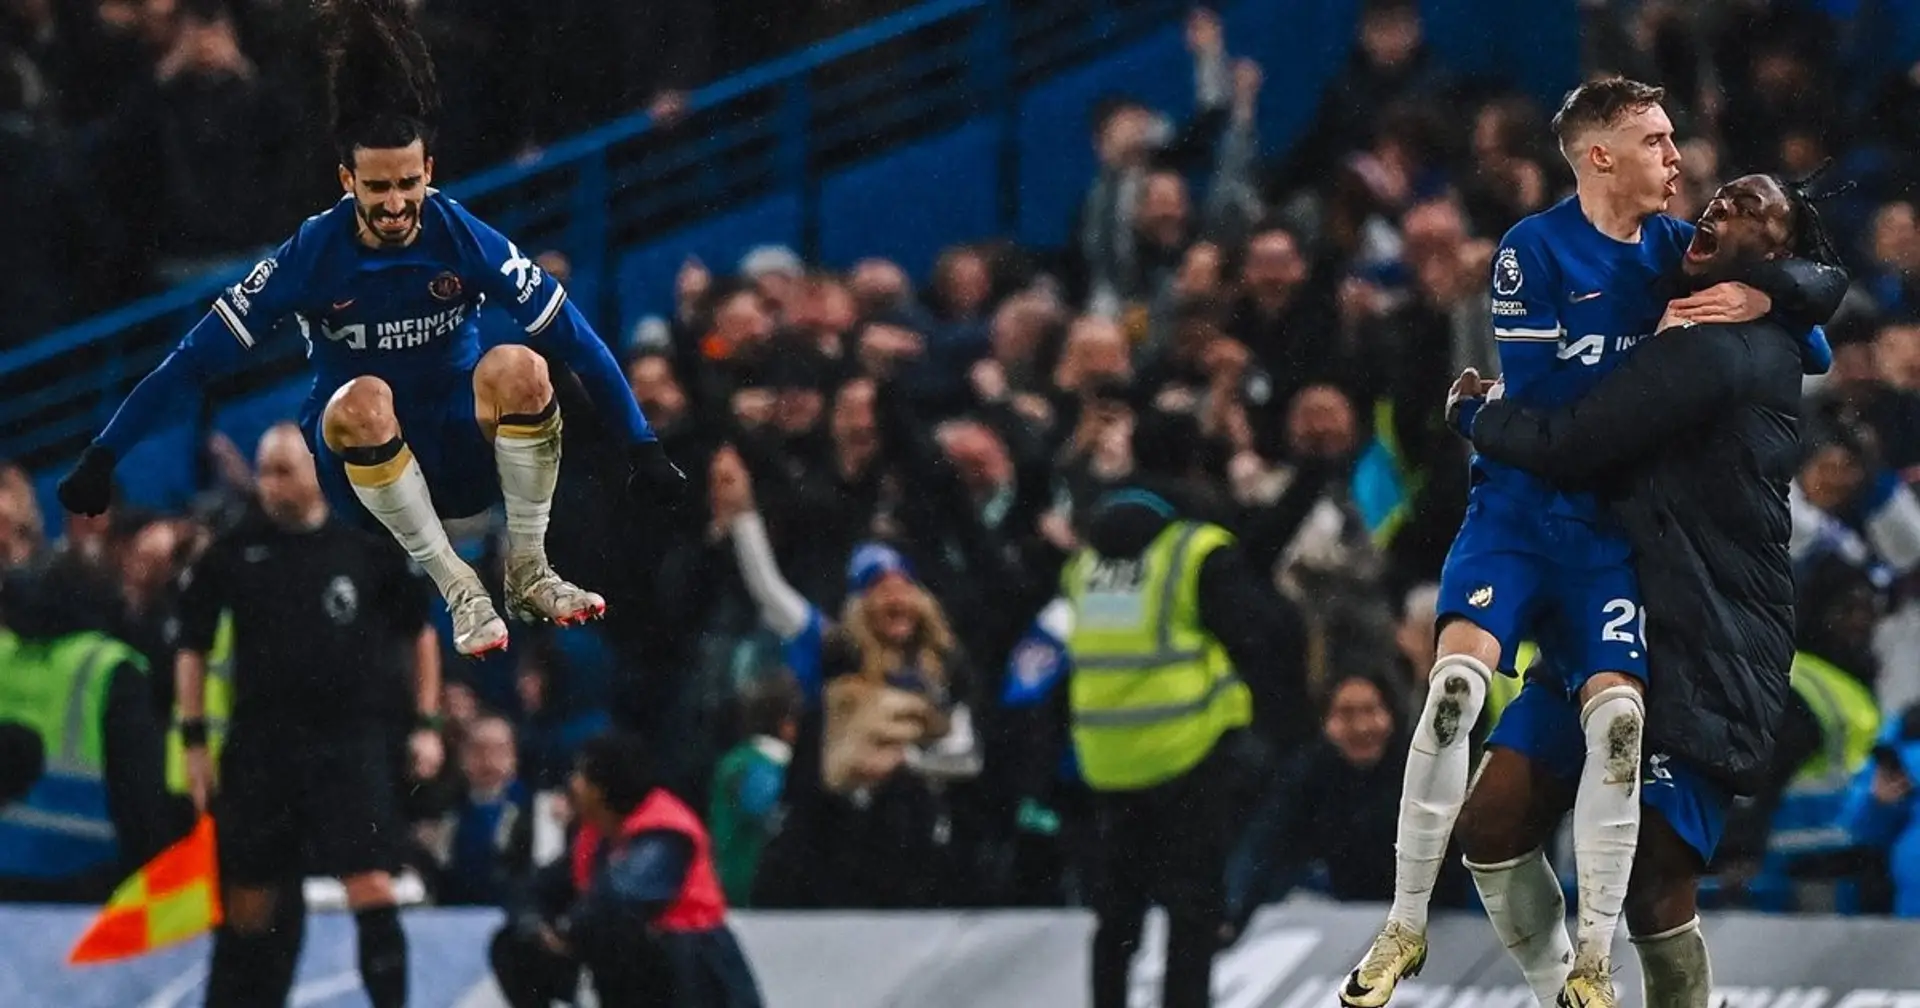 Chelsea defeat Man United in the game of the season and 3 more big stories you may have missed